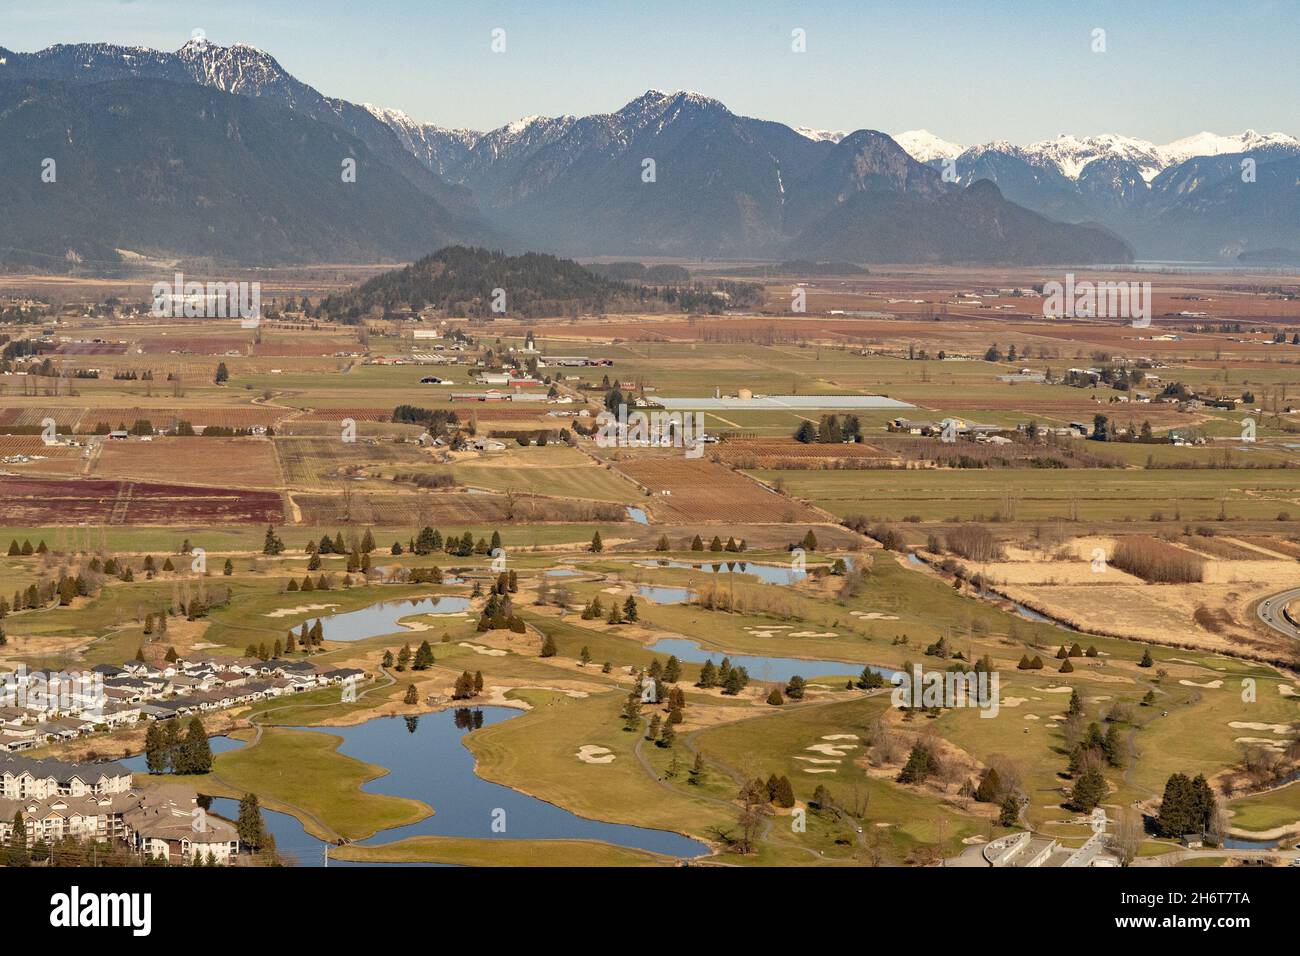 Summa's prairie shows extensive farming in the Lower Fraser River Valley in the city of Chilliwack. Stock Photo